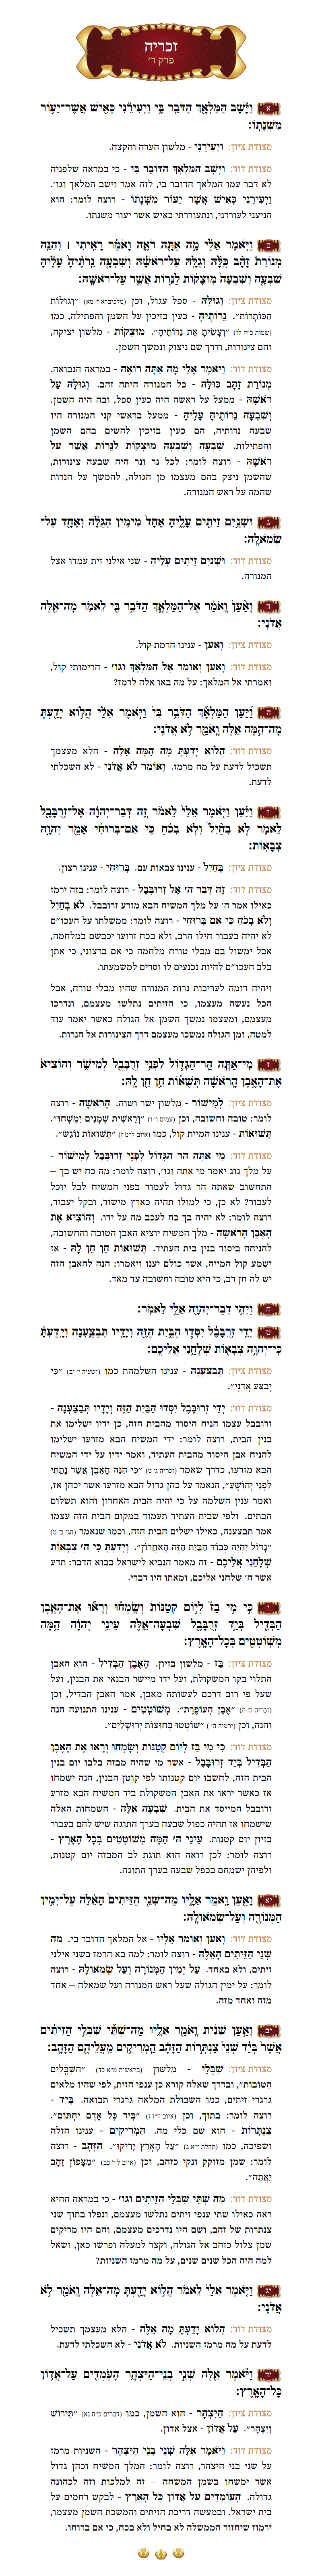 Sefer Zechariah Chapter 4 with commentary